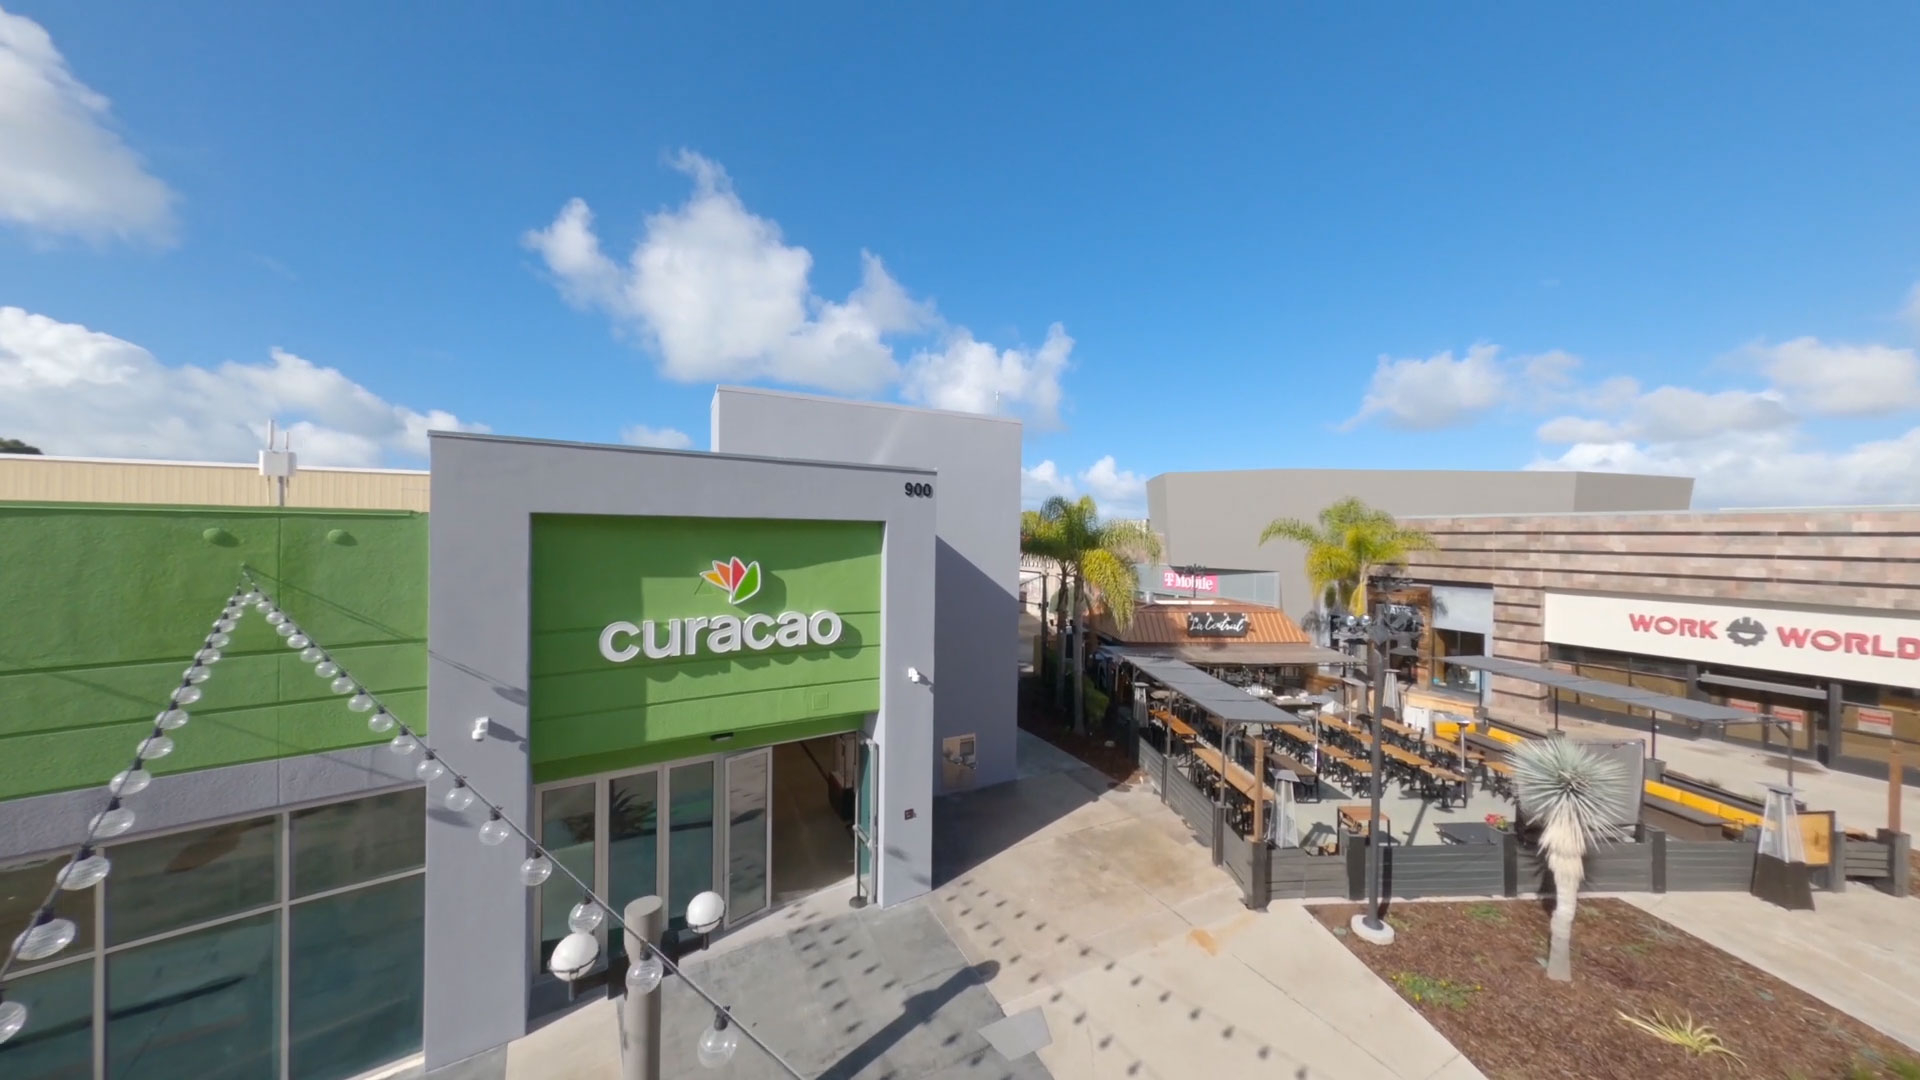 Curacao becomes a member of the Chula Vista Chamber of Commerce as the retailer opens its newest retail store located in the Chula Vista Center in Chula Vista, California.